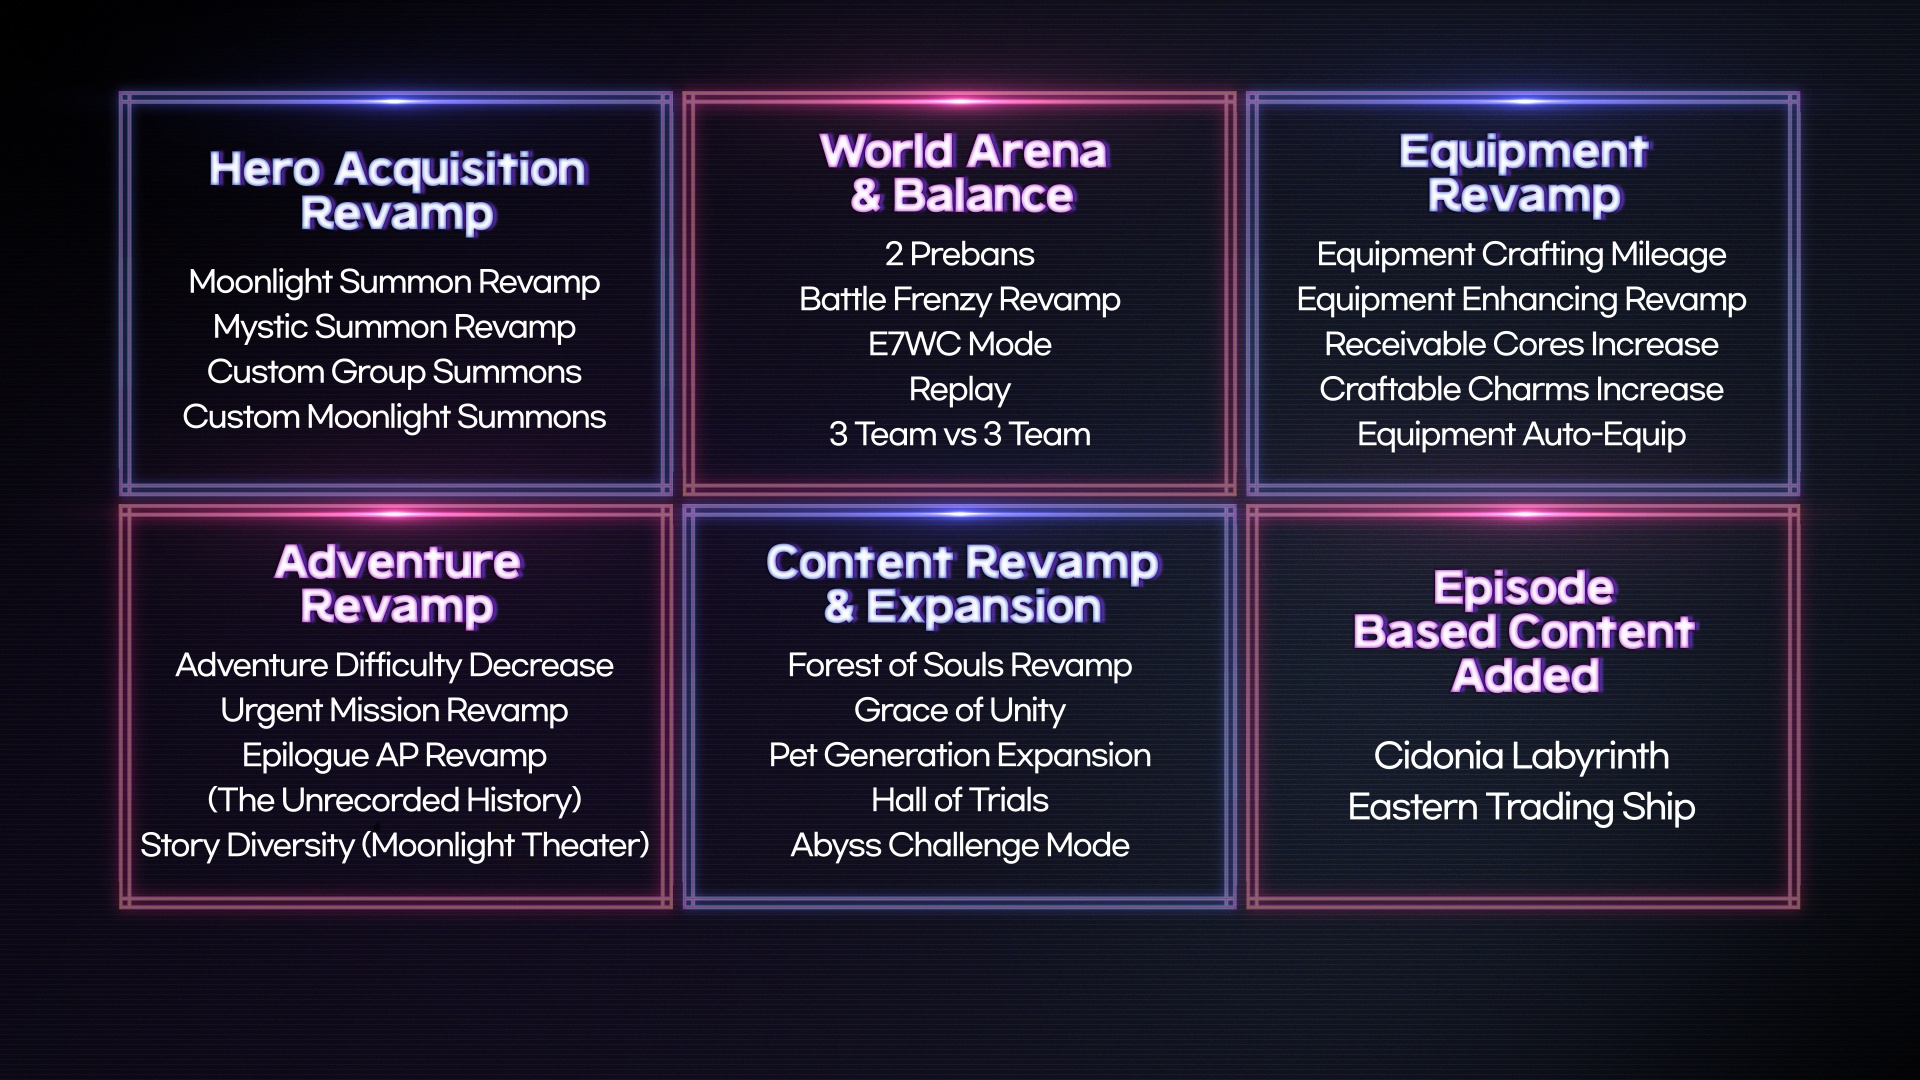 Epic Seven – E7WC 2022, Future Content, Quality of Life, and more in Major Awaken Update